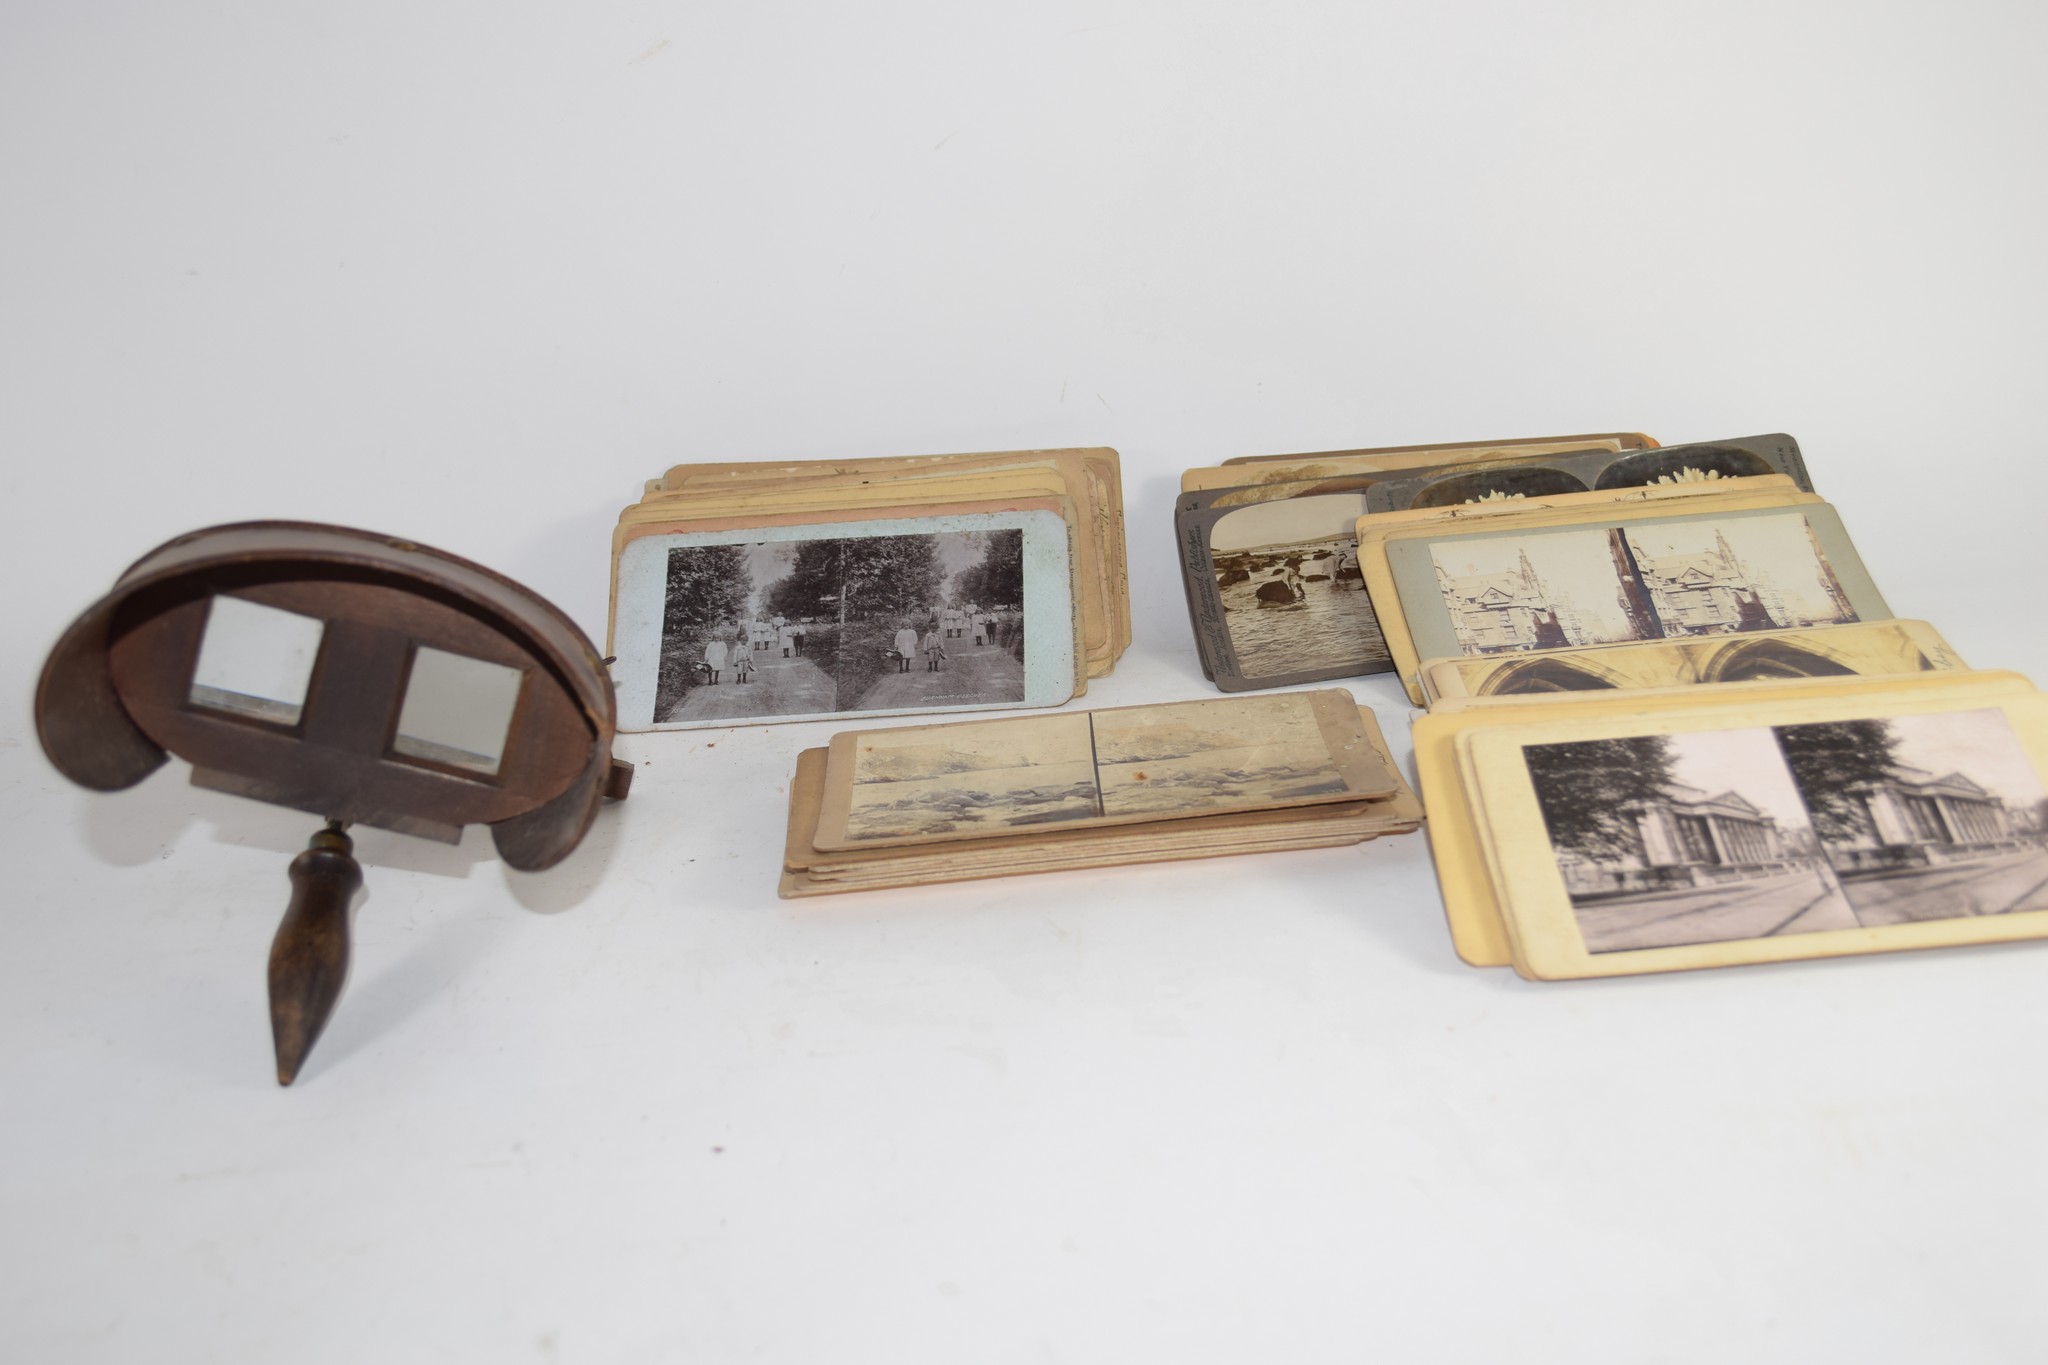 STEREOSCOPIC VIEWER AND QUANTITY OF VIEWS, MAINLY TOPOGRAPHICAL, SOME AMERICAN AND HOLY LAND